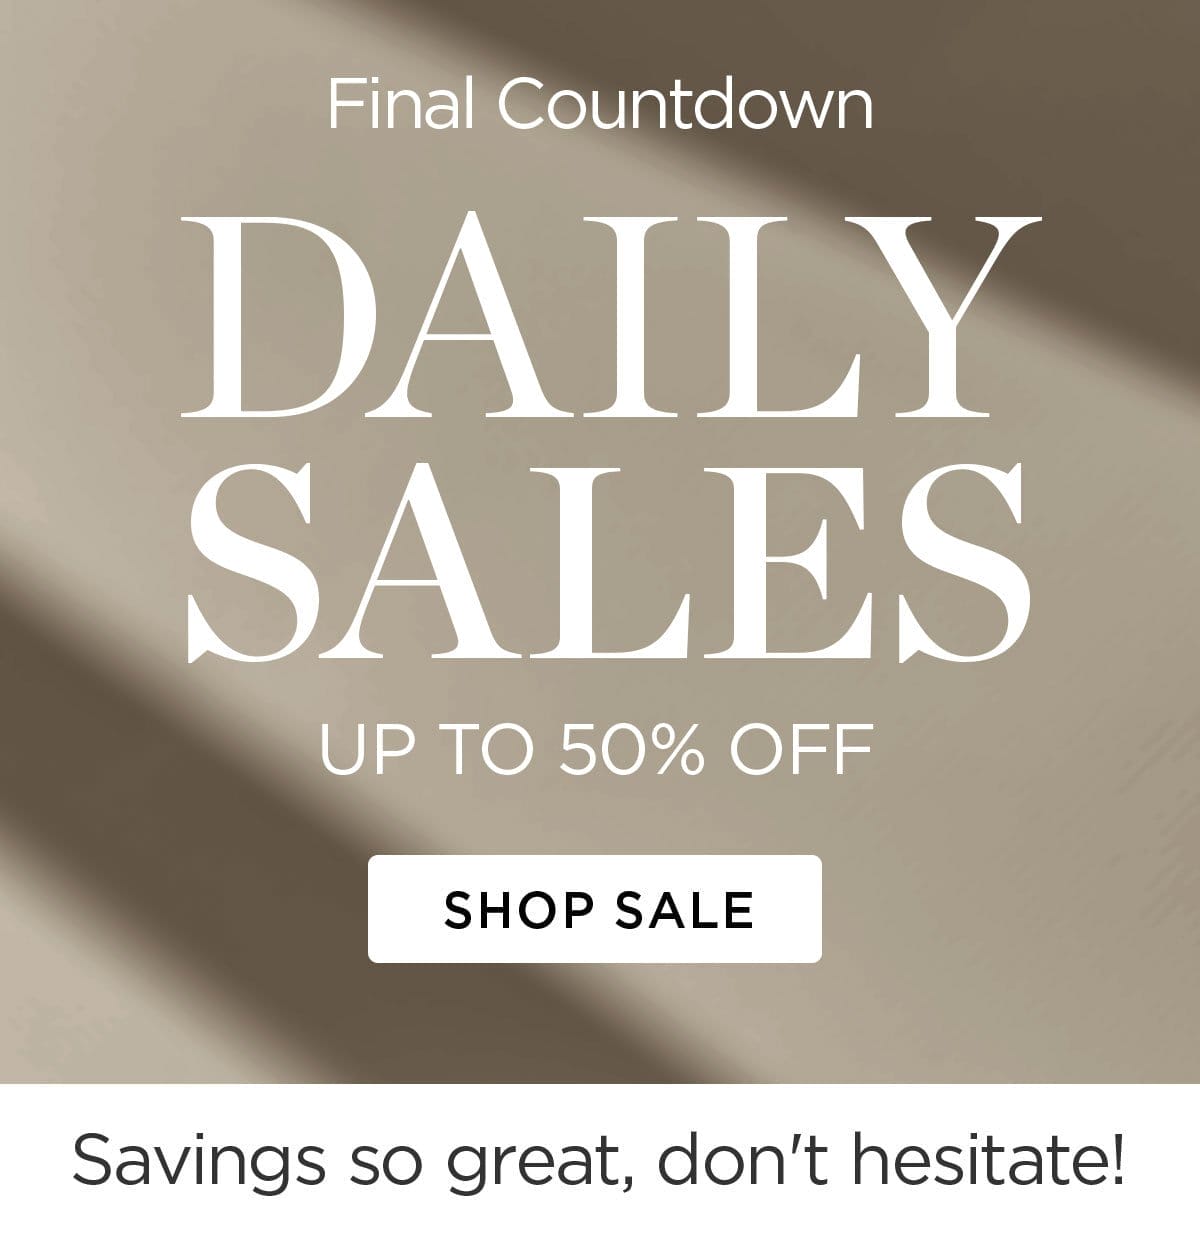 Final Countdown - Daily Sales - Up to 50% Off - Shop Sale - Savings so great, don't hesitate!